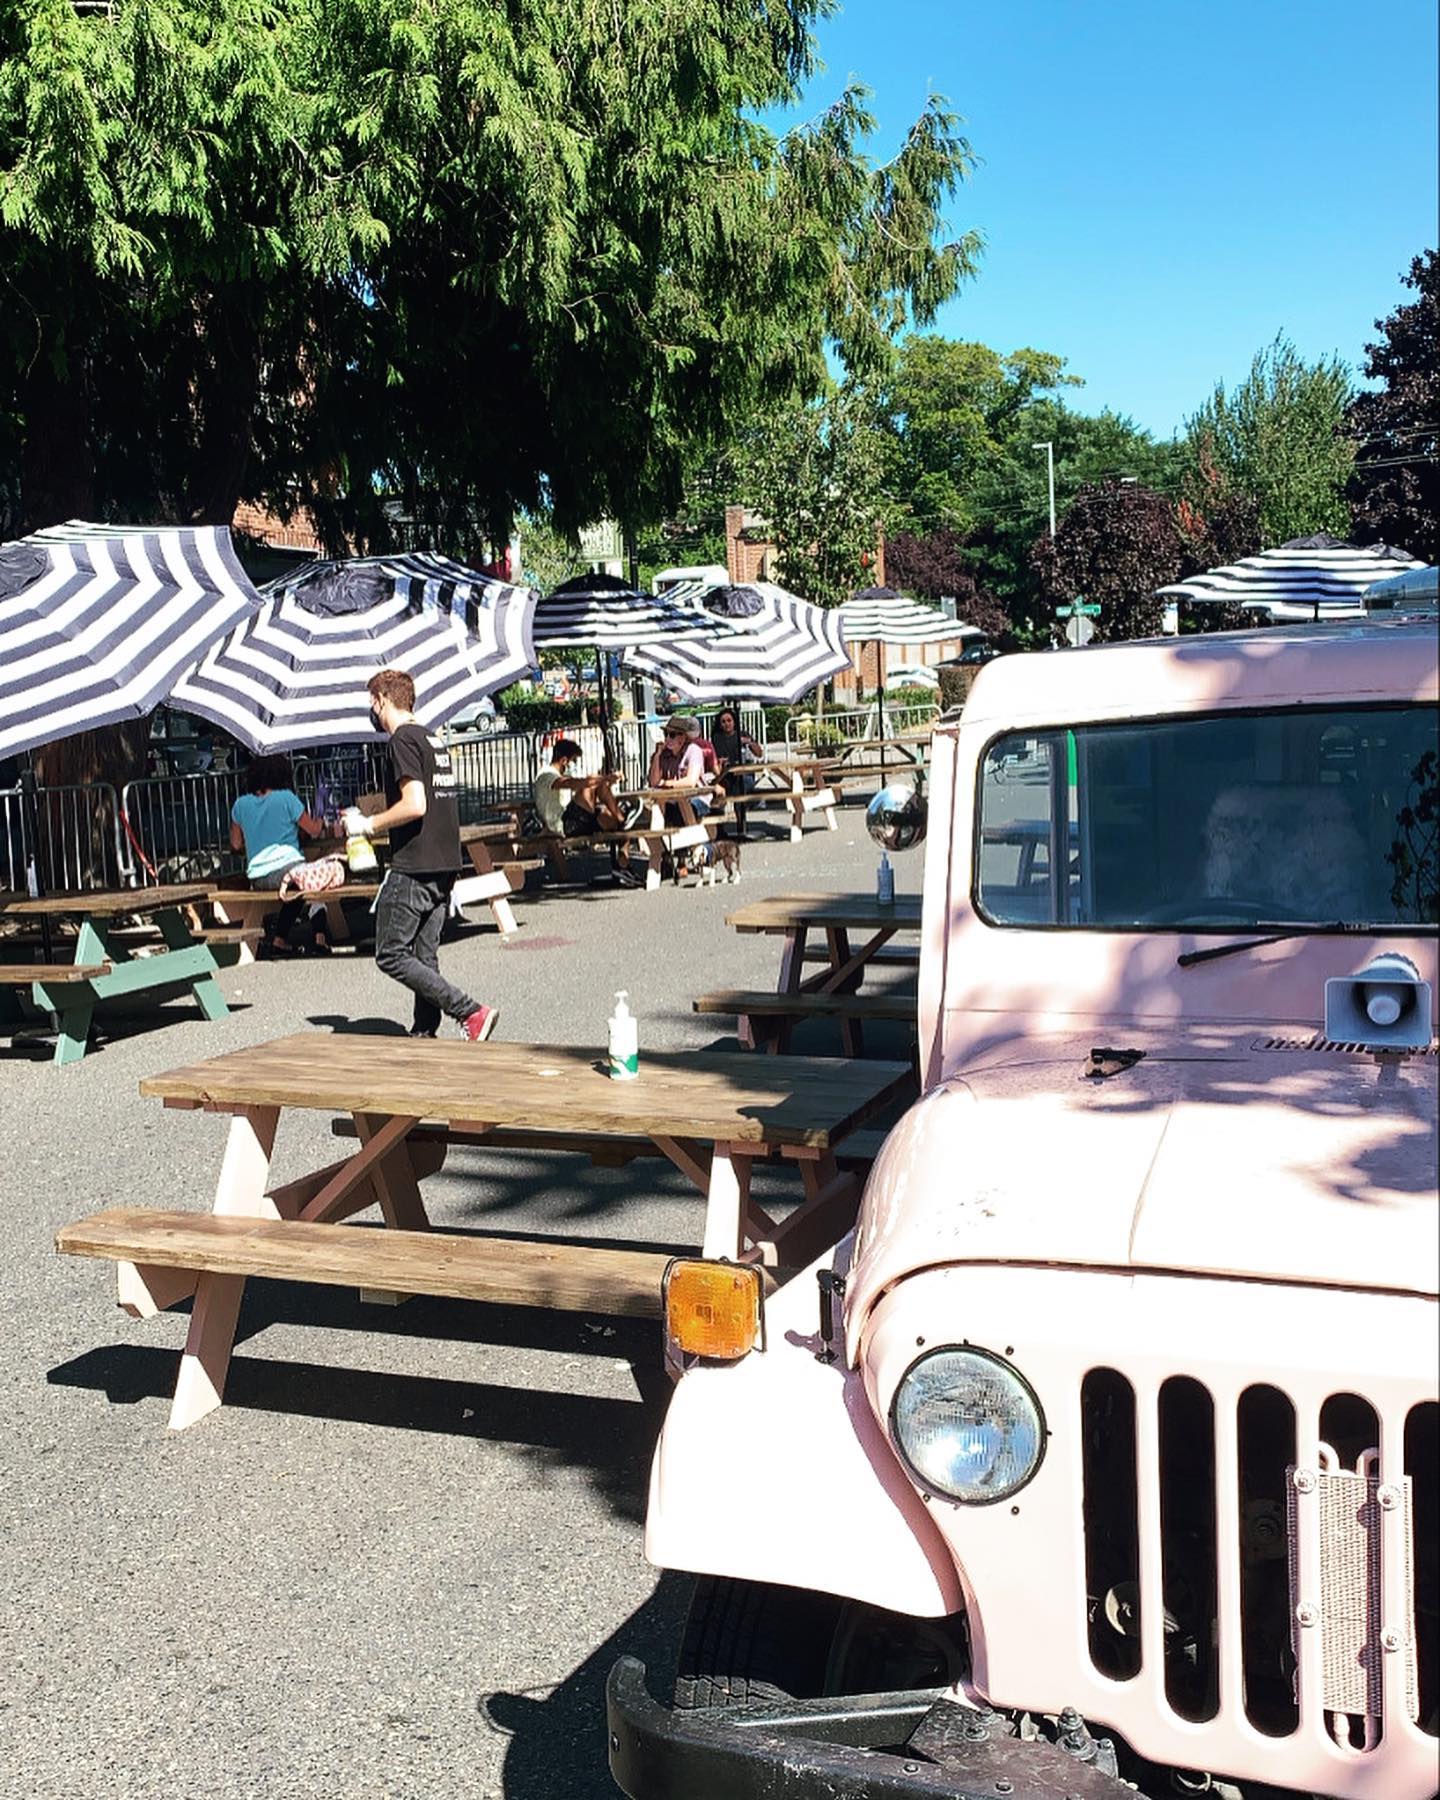 Tables are lined up on W Crockett Street in Queen Anne, with striped umbrellas and a masked server bringing food to customers. In the foreground is a pink jeep.